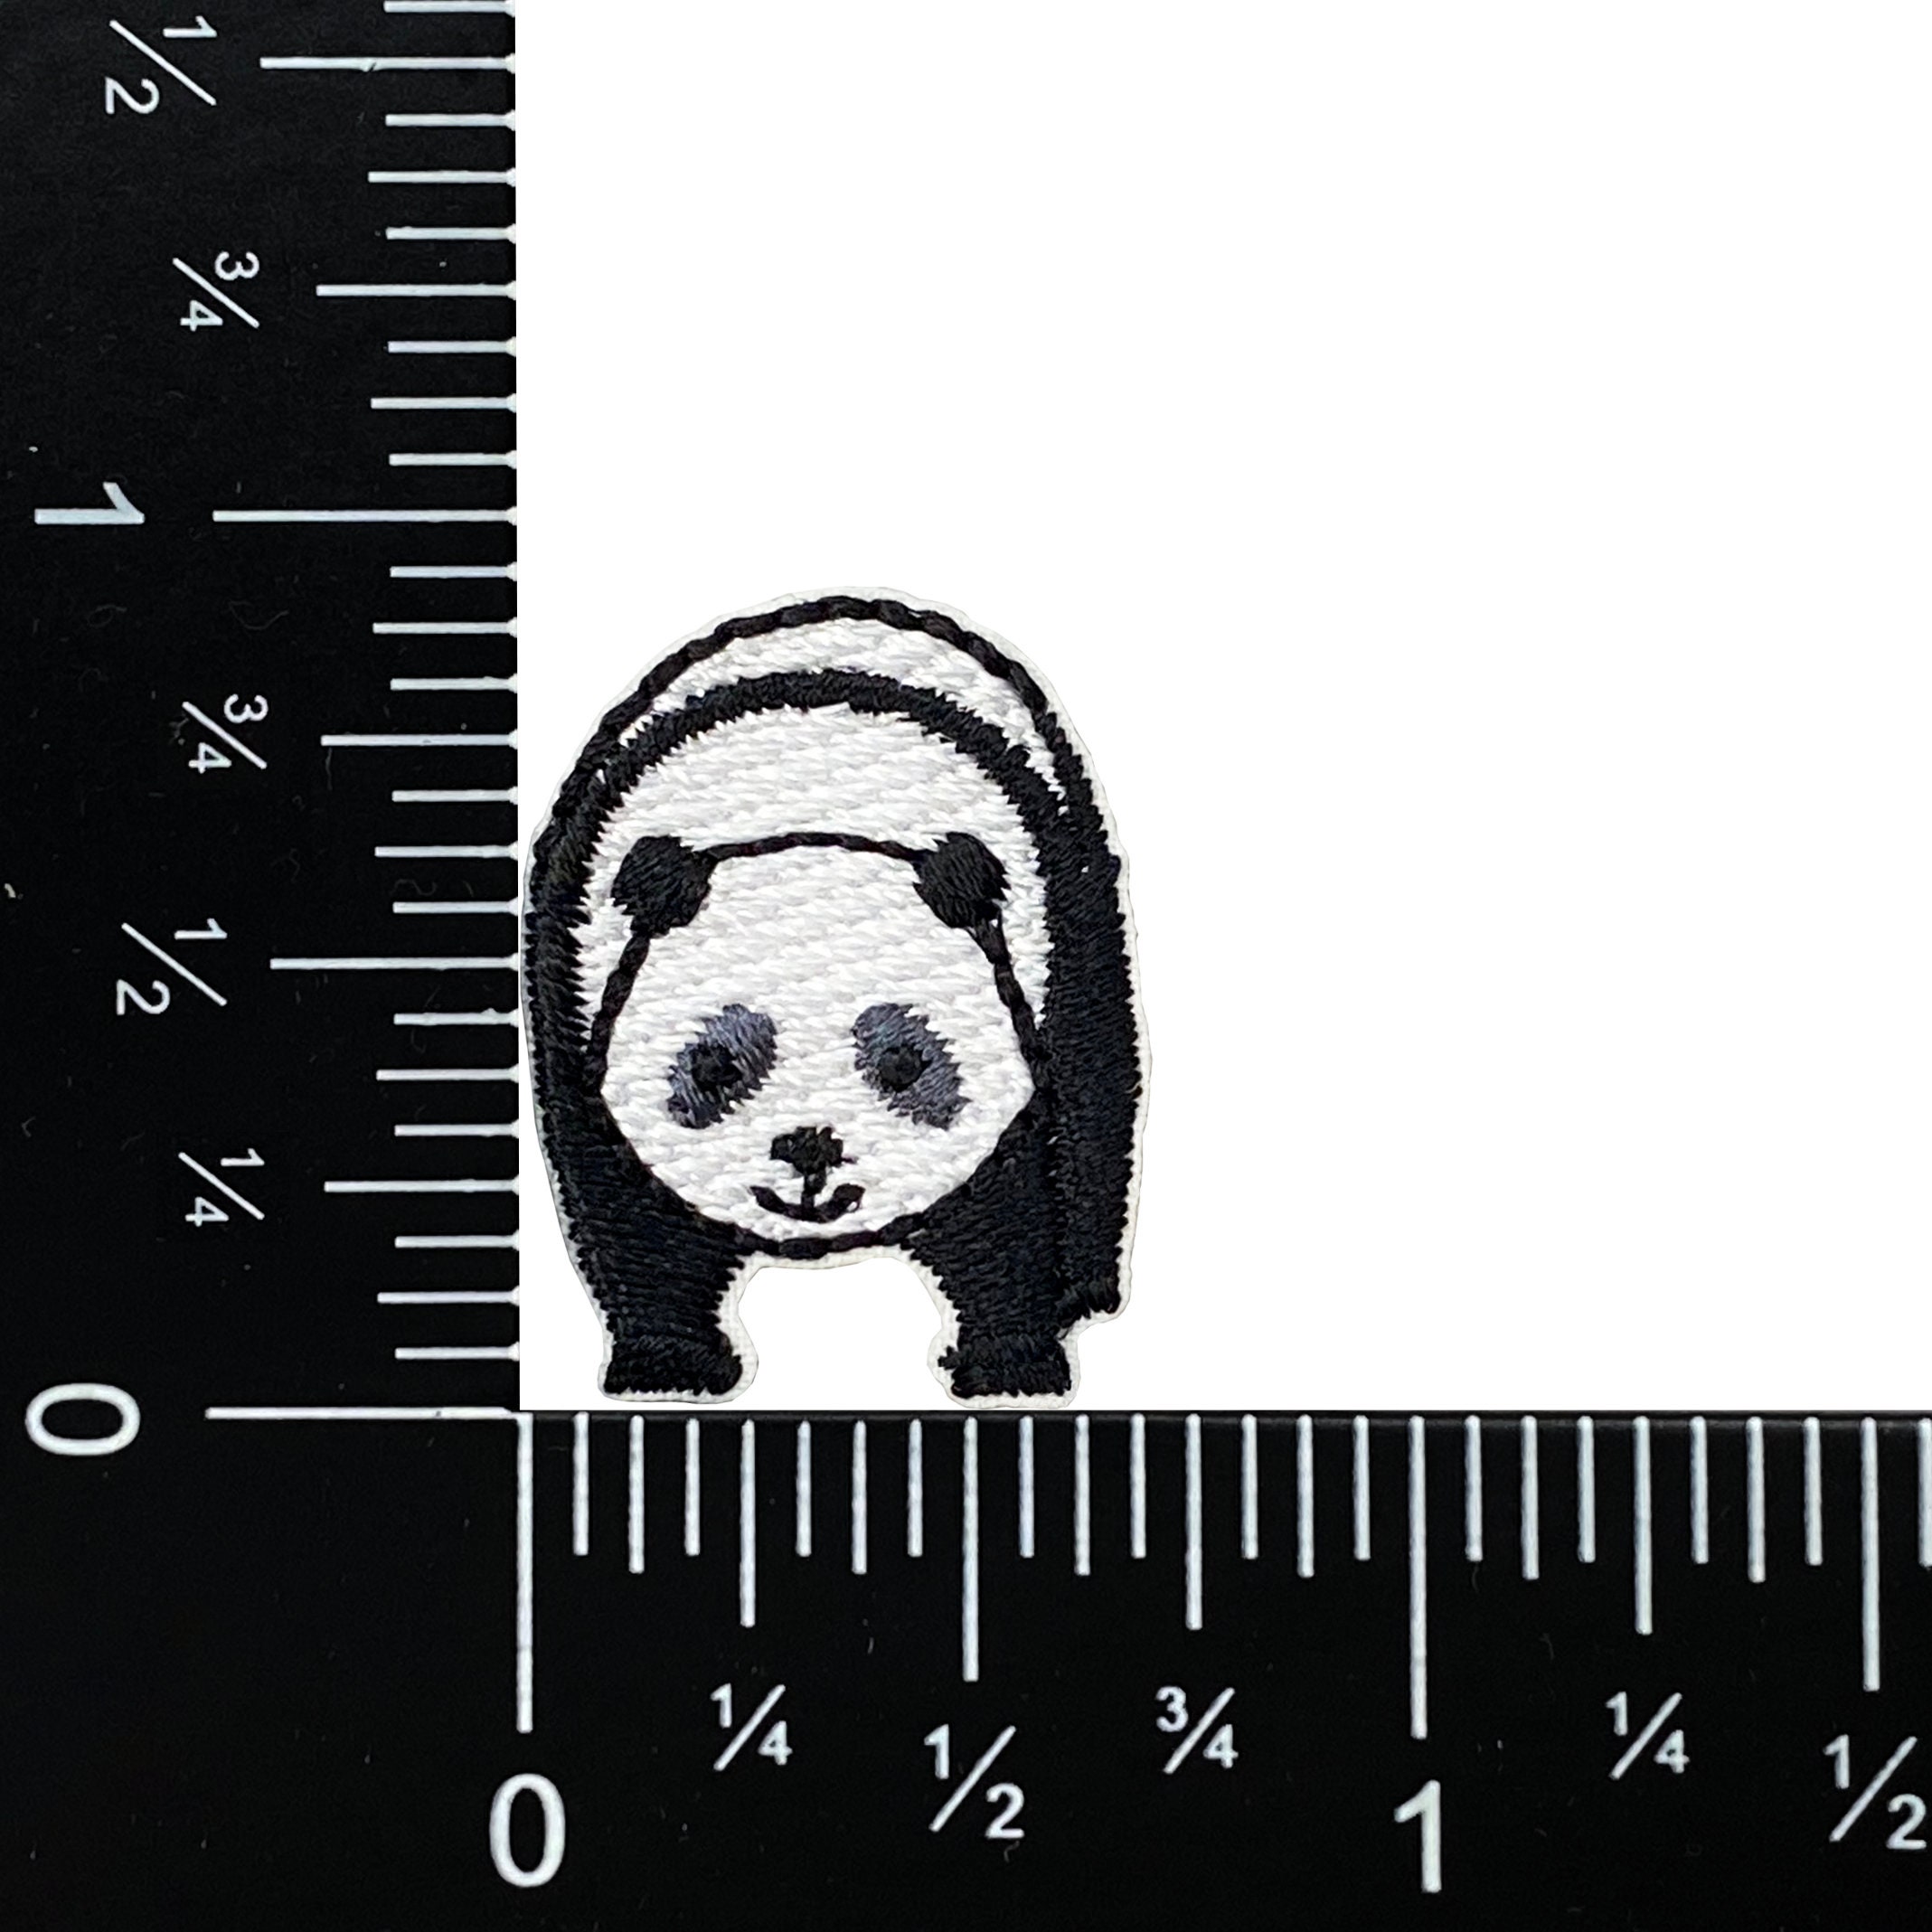 2pcs Small Animal Embroidered Applique Badge Giant Panda Embroidery Patches  DIY Back Glue Patch Iron On Patches For Jackets, Sew On Patches For Clothi